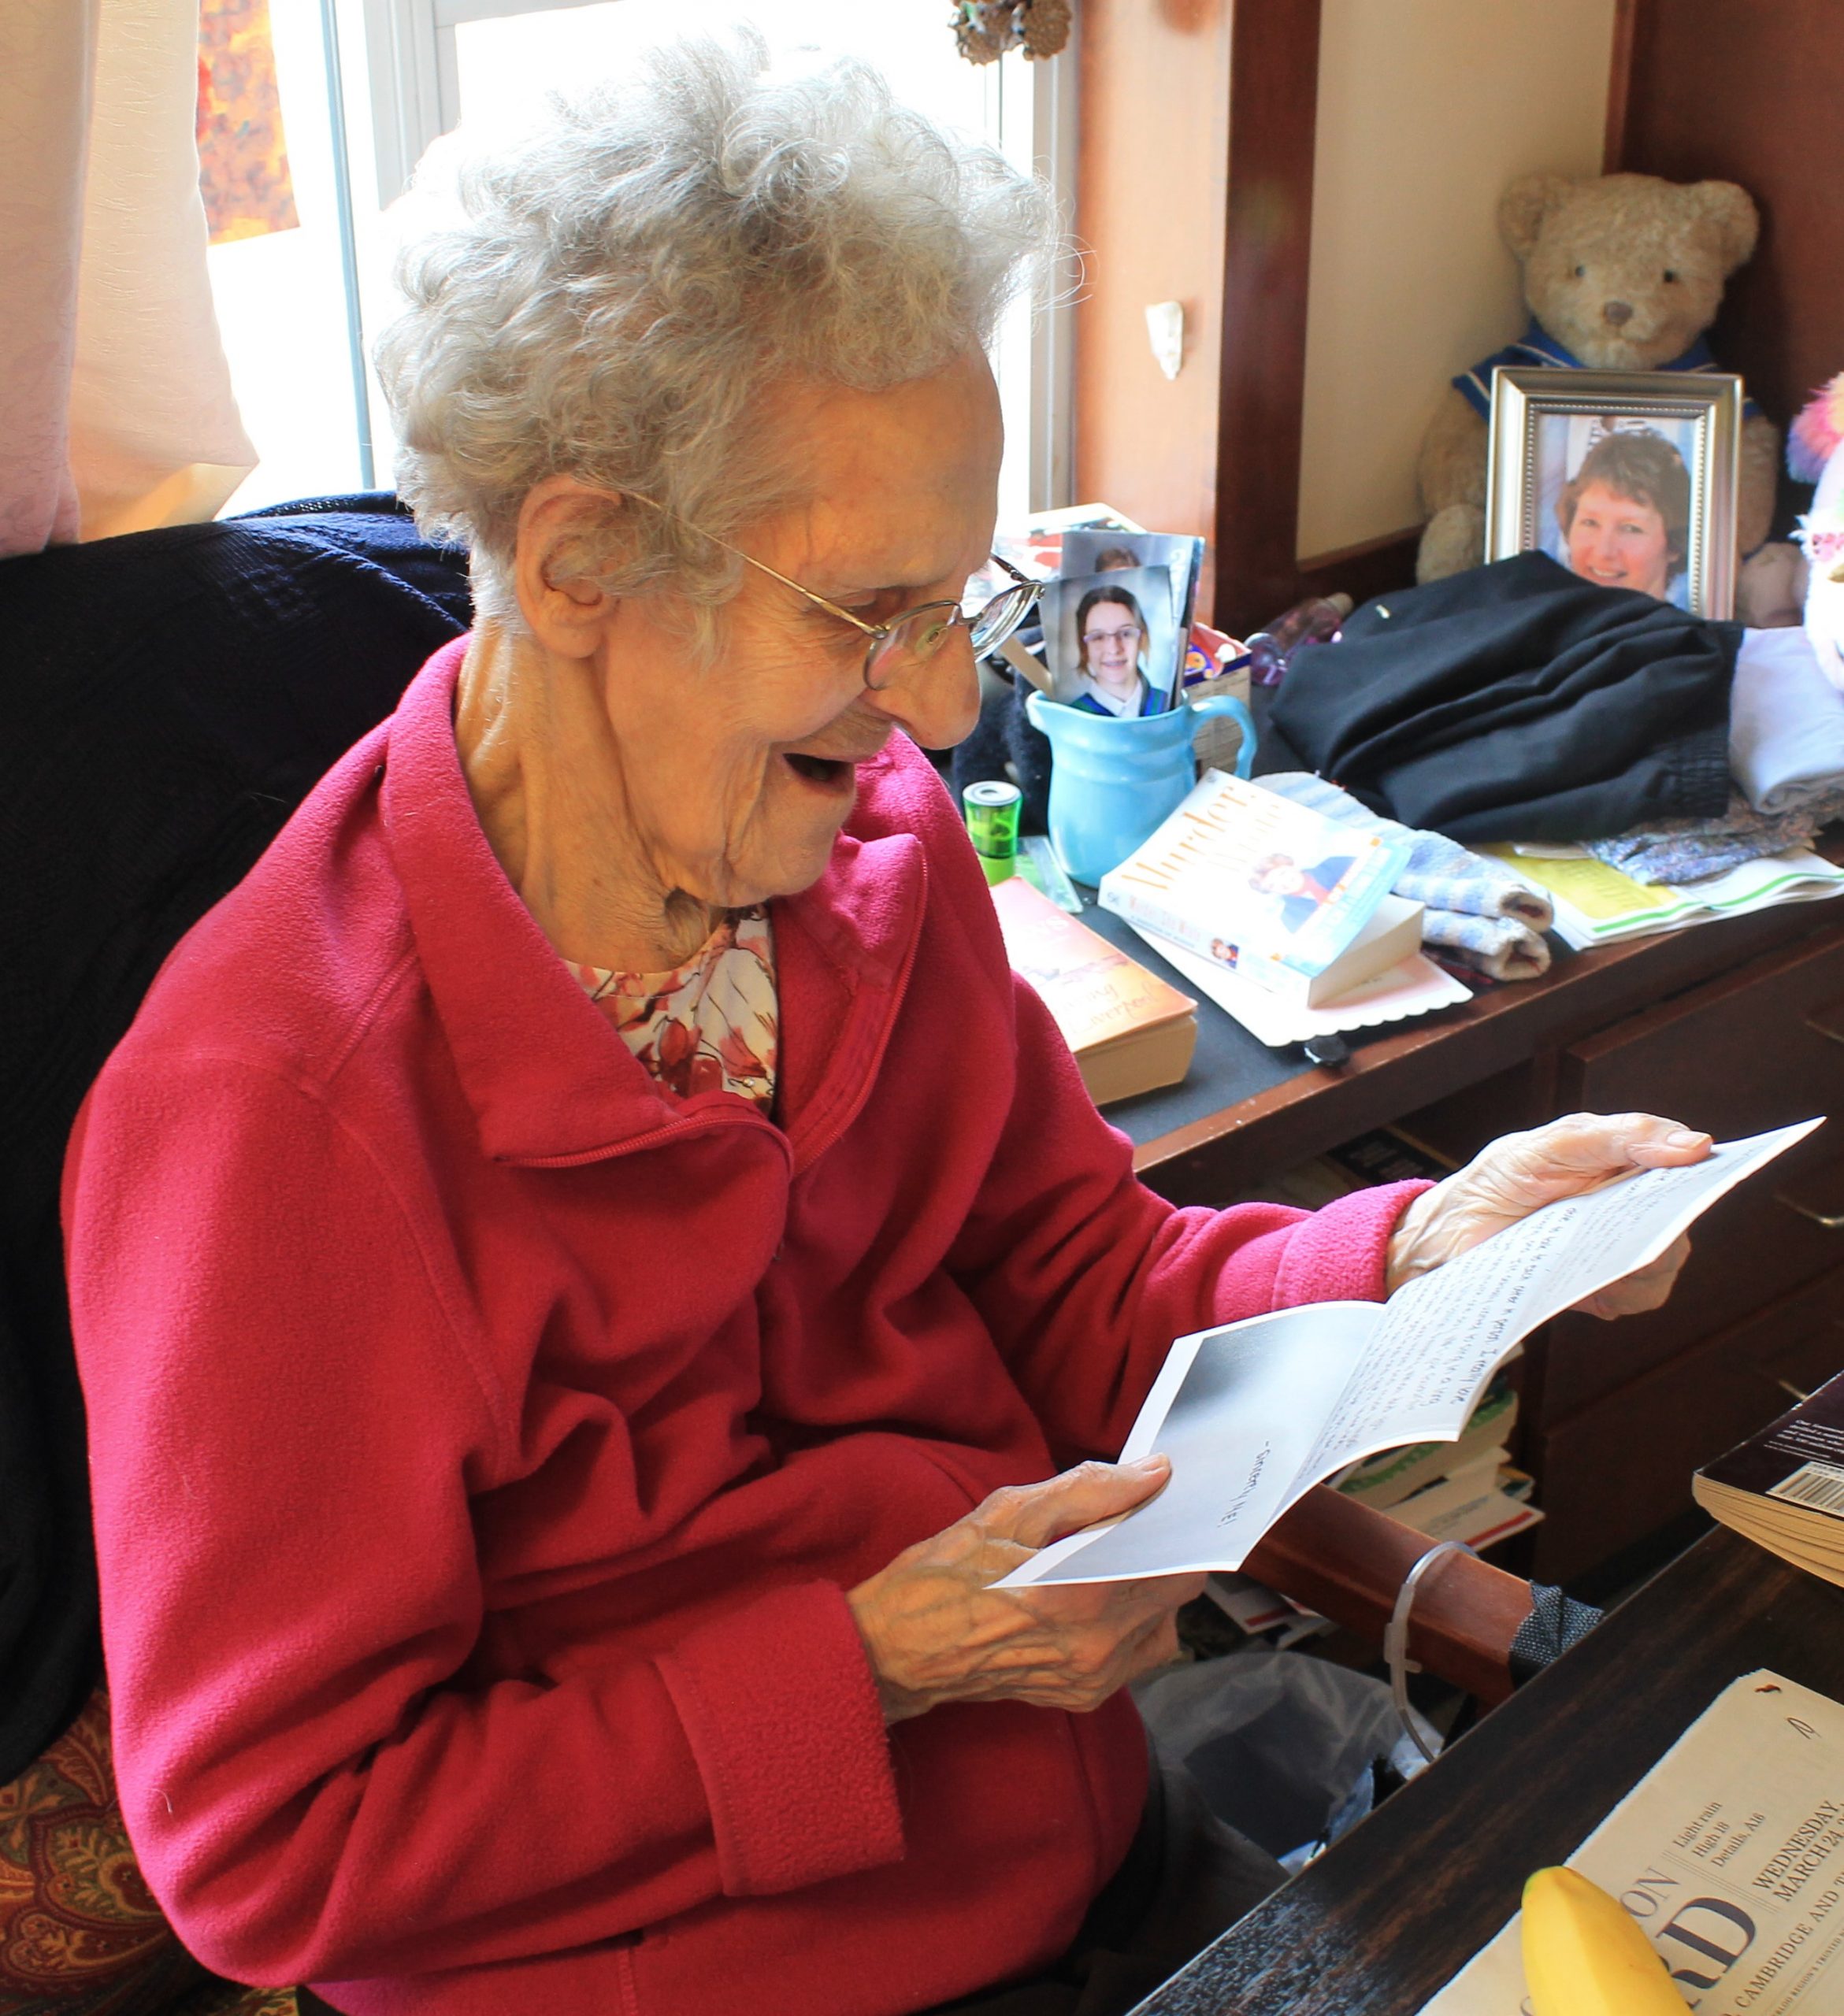 Long-term care resident reading a letter written by university students in her room